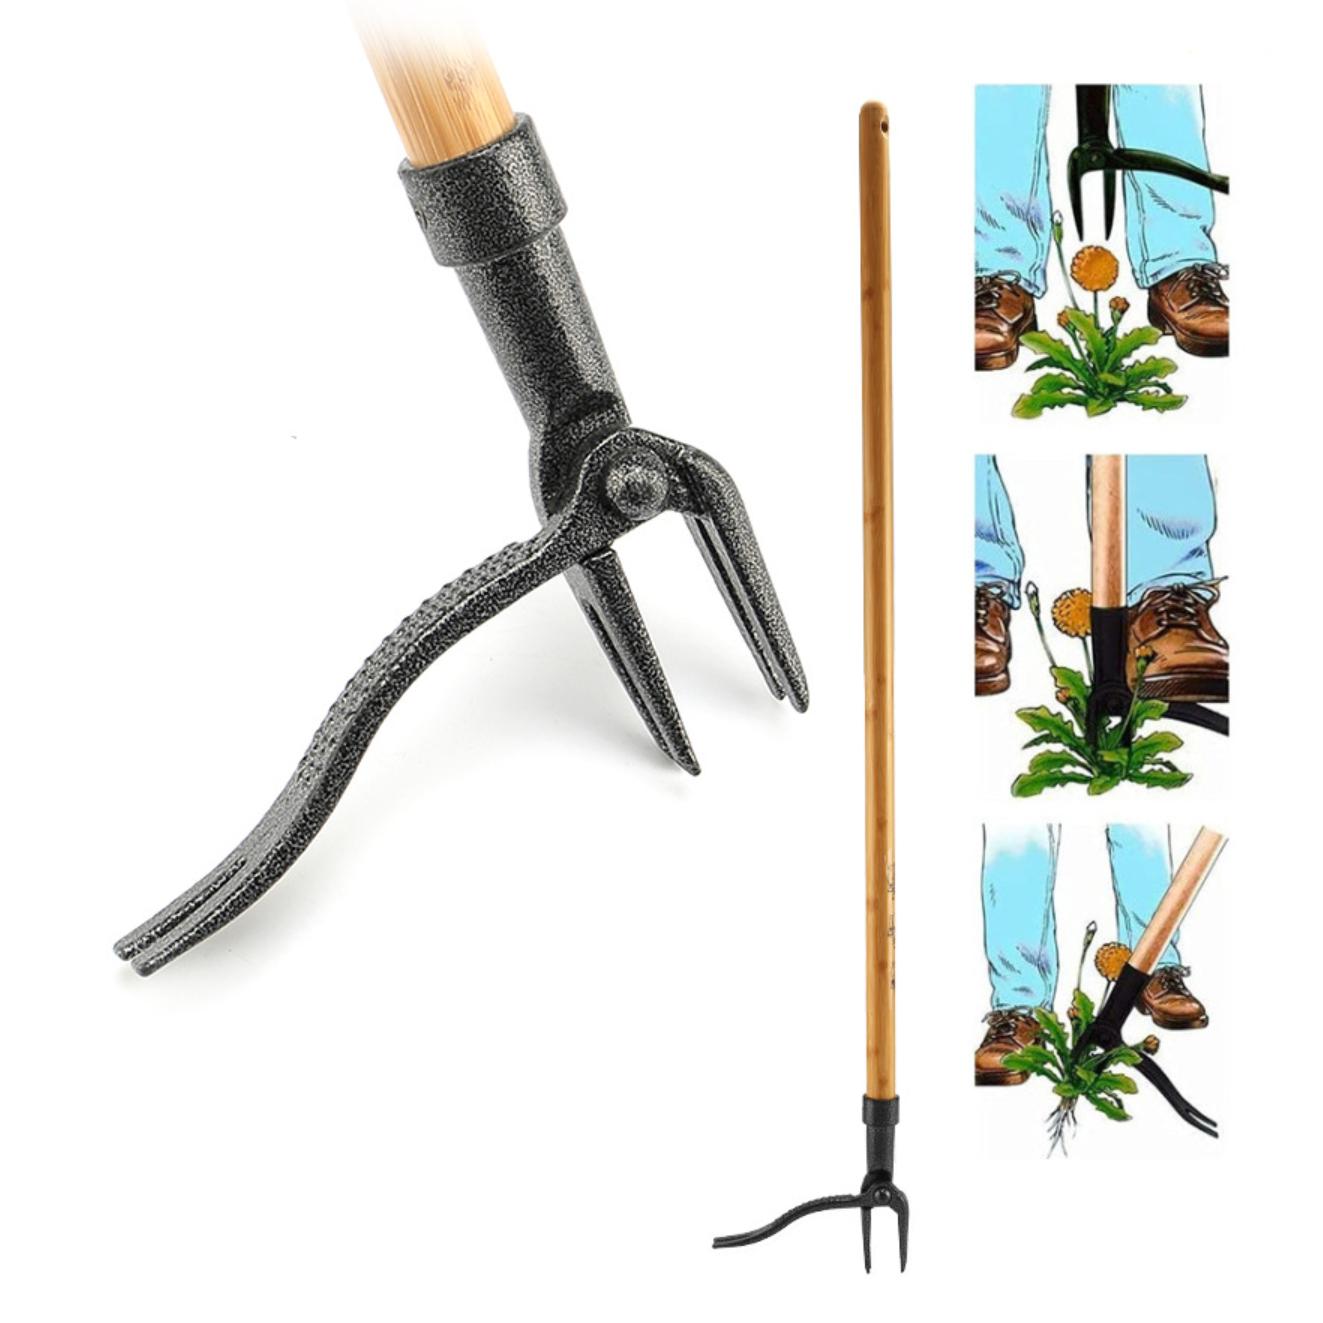 Garden tools for weeding: Stand Up Weed Puller Tool